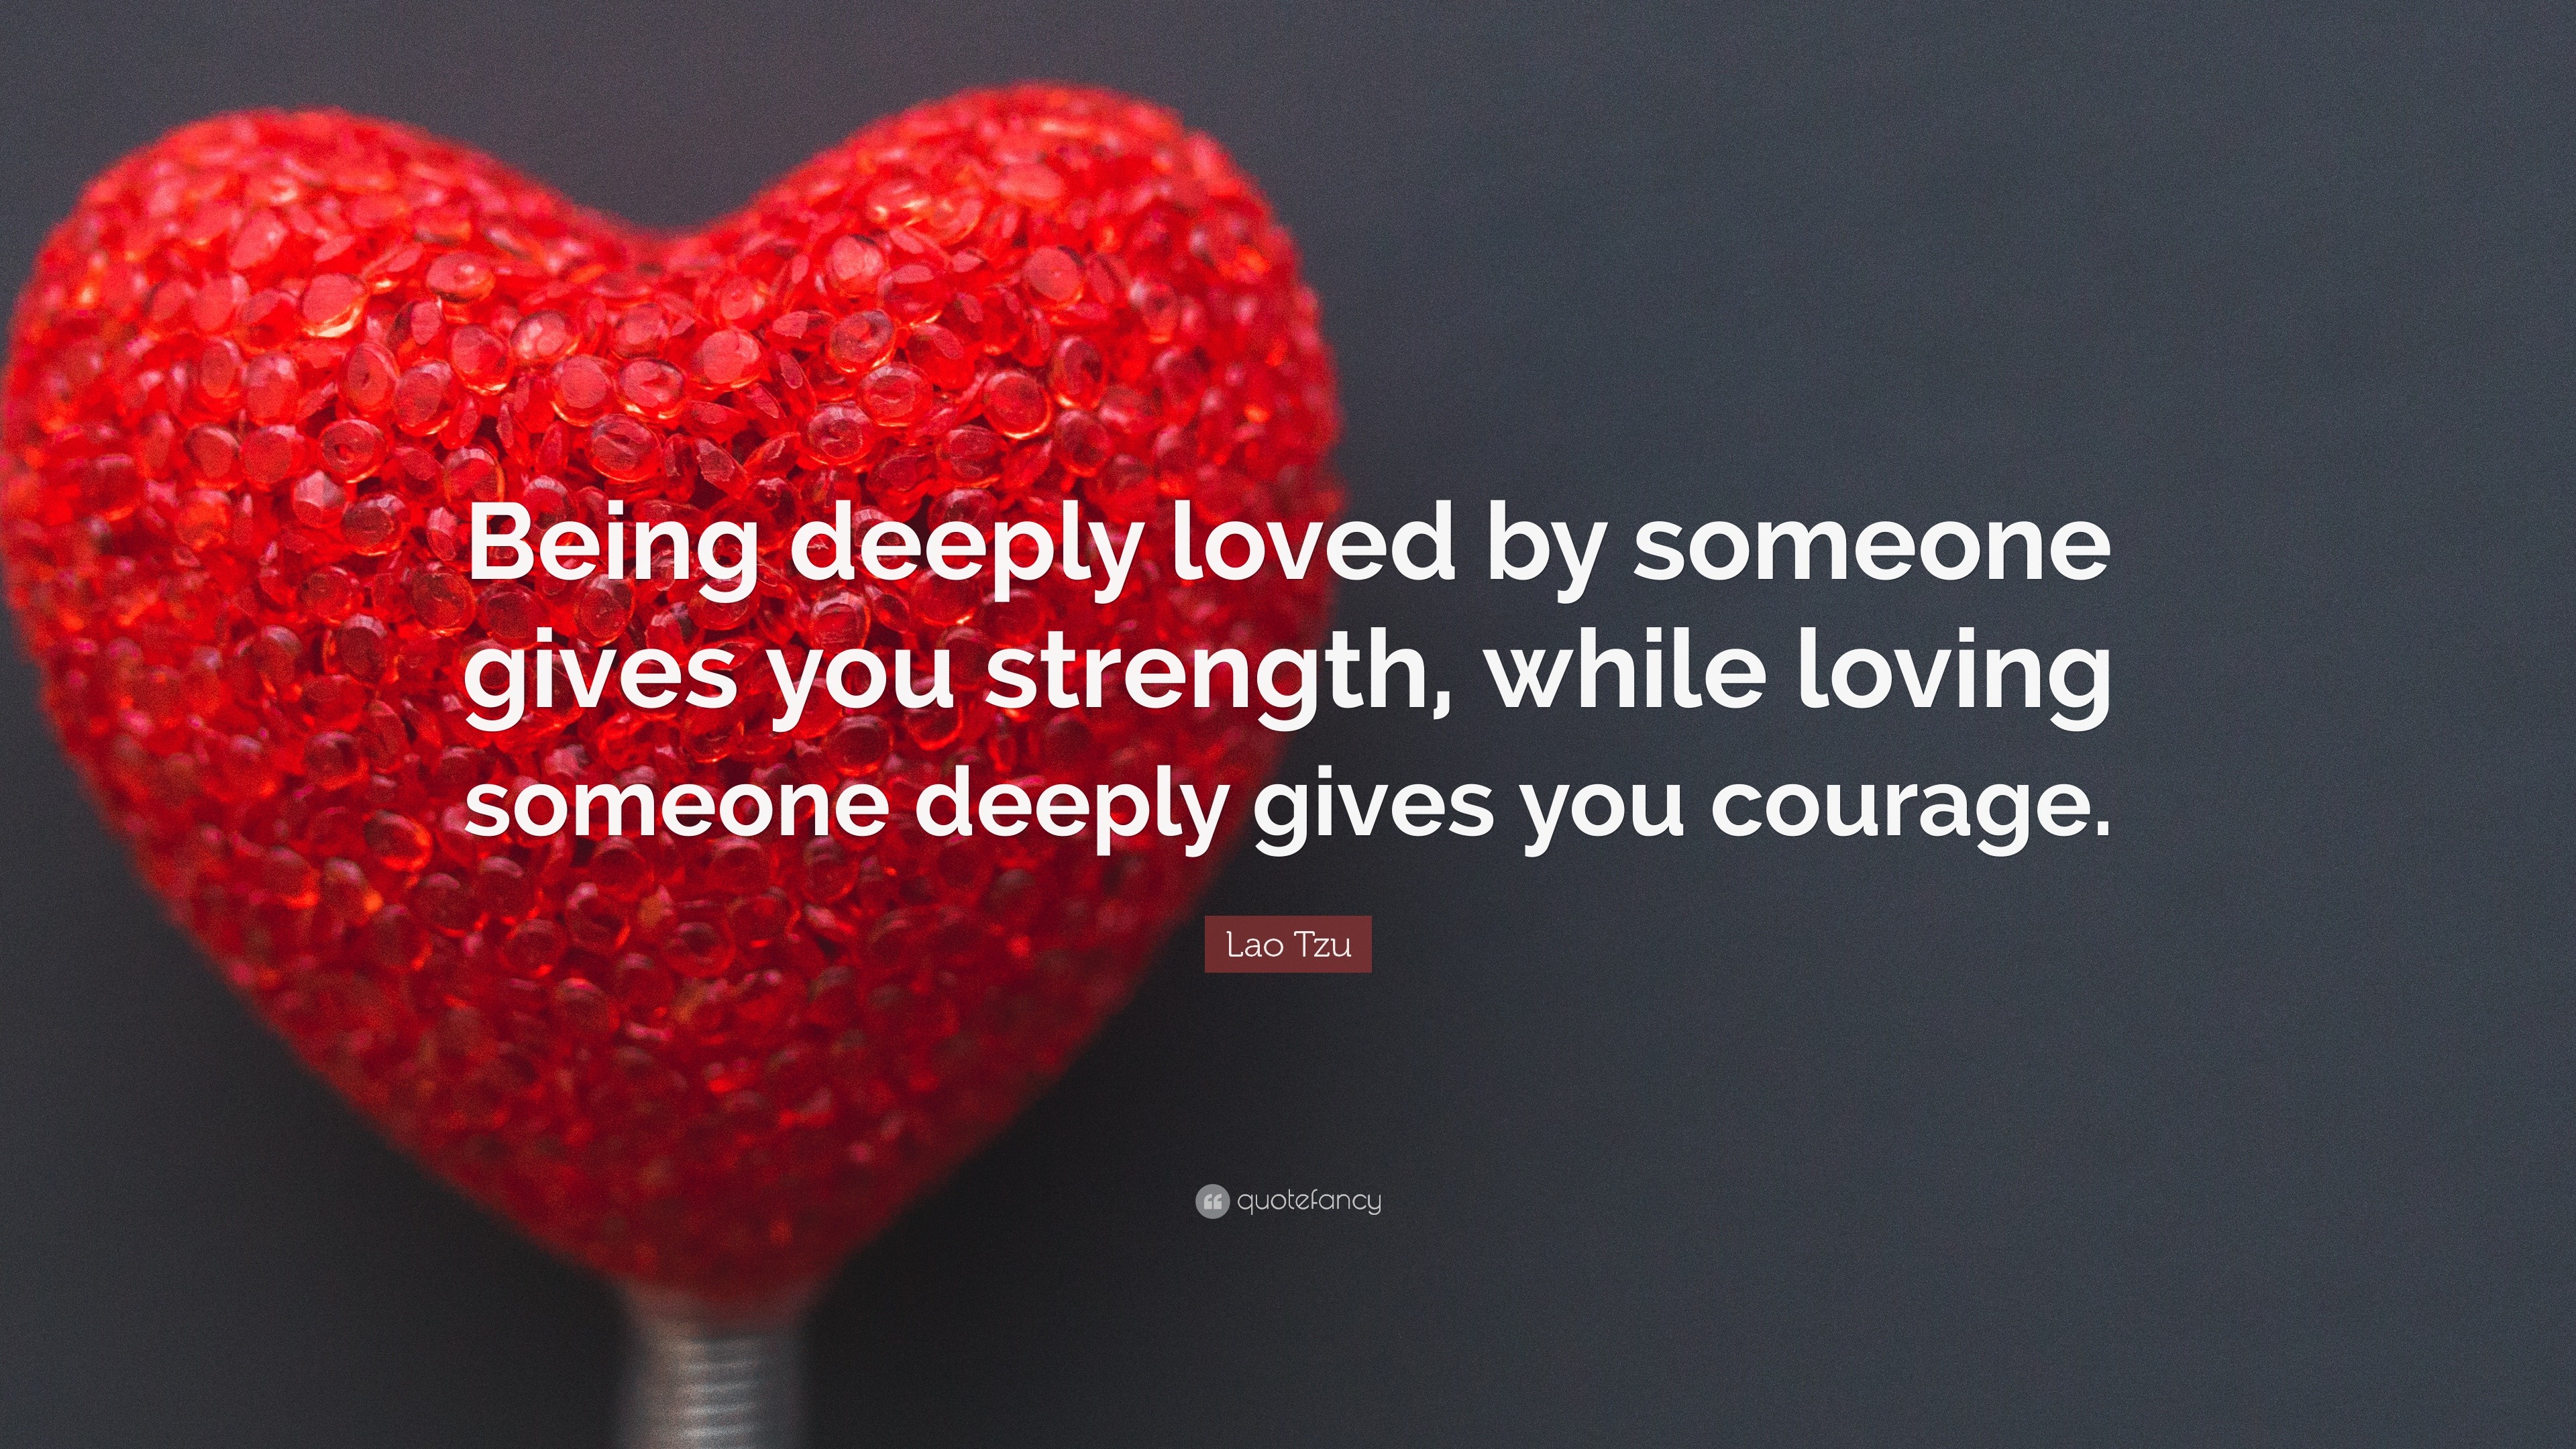 Lao Tzu Quote: “Being deeply loved by someone gives you strength, while ...